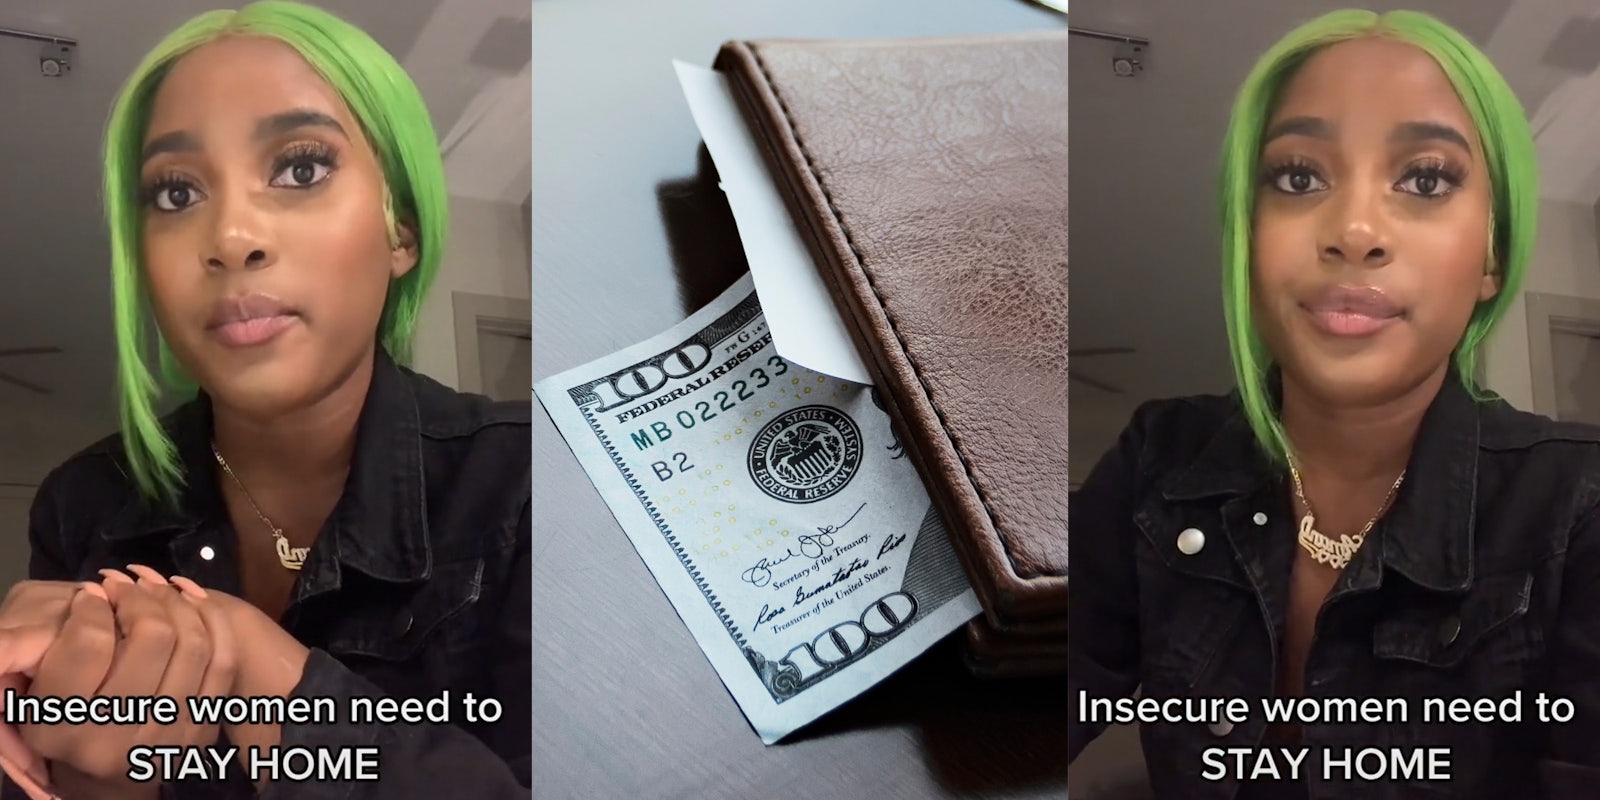 woman with green hair and caption 'insecure women need to STAY HOME' (l&r) hundred dollar bill in restaurant bill holder (c)